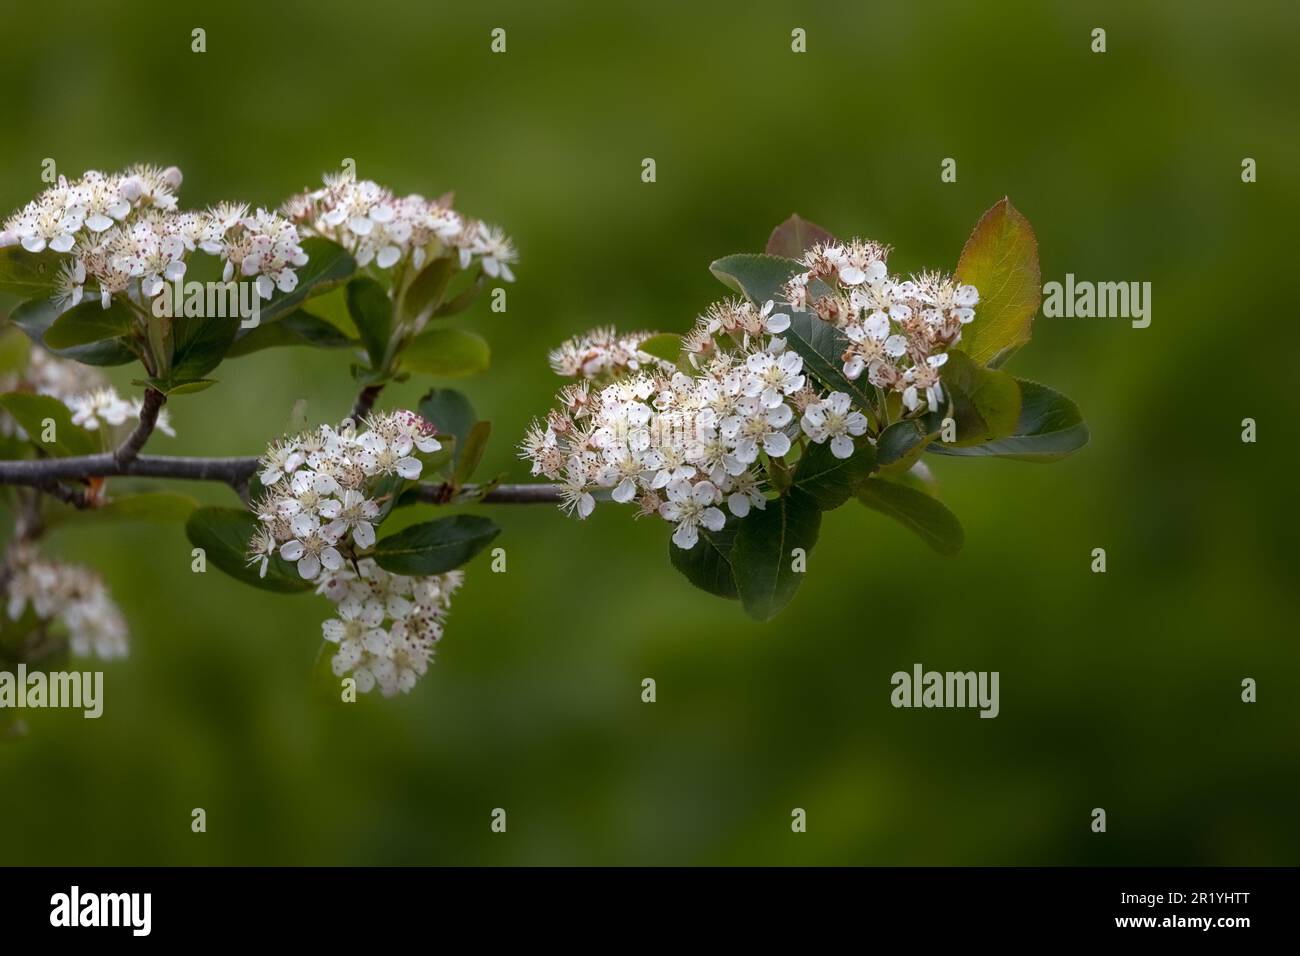 Closeup of flowers of Aronia × prunifolia 'Viking' in a garden in Spring Stock Photo